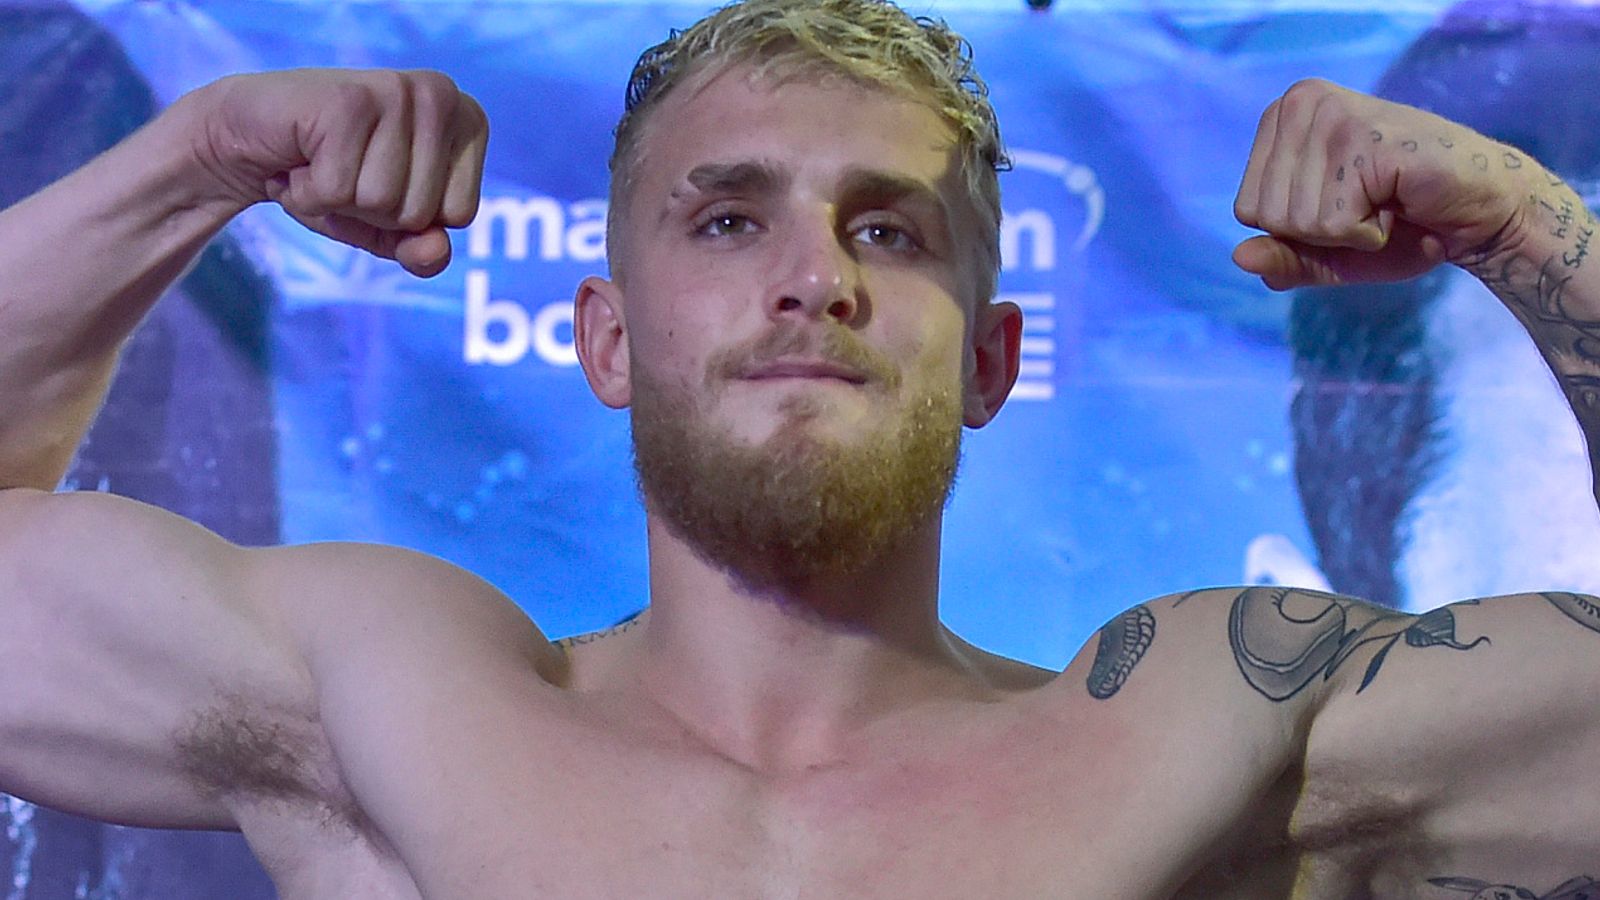 Jake Paul vs AnEsonGib: YouTuber boxing is back - but for how long